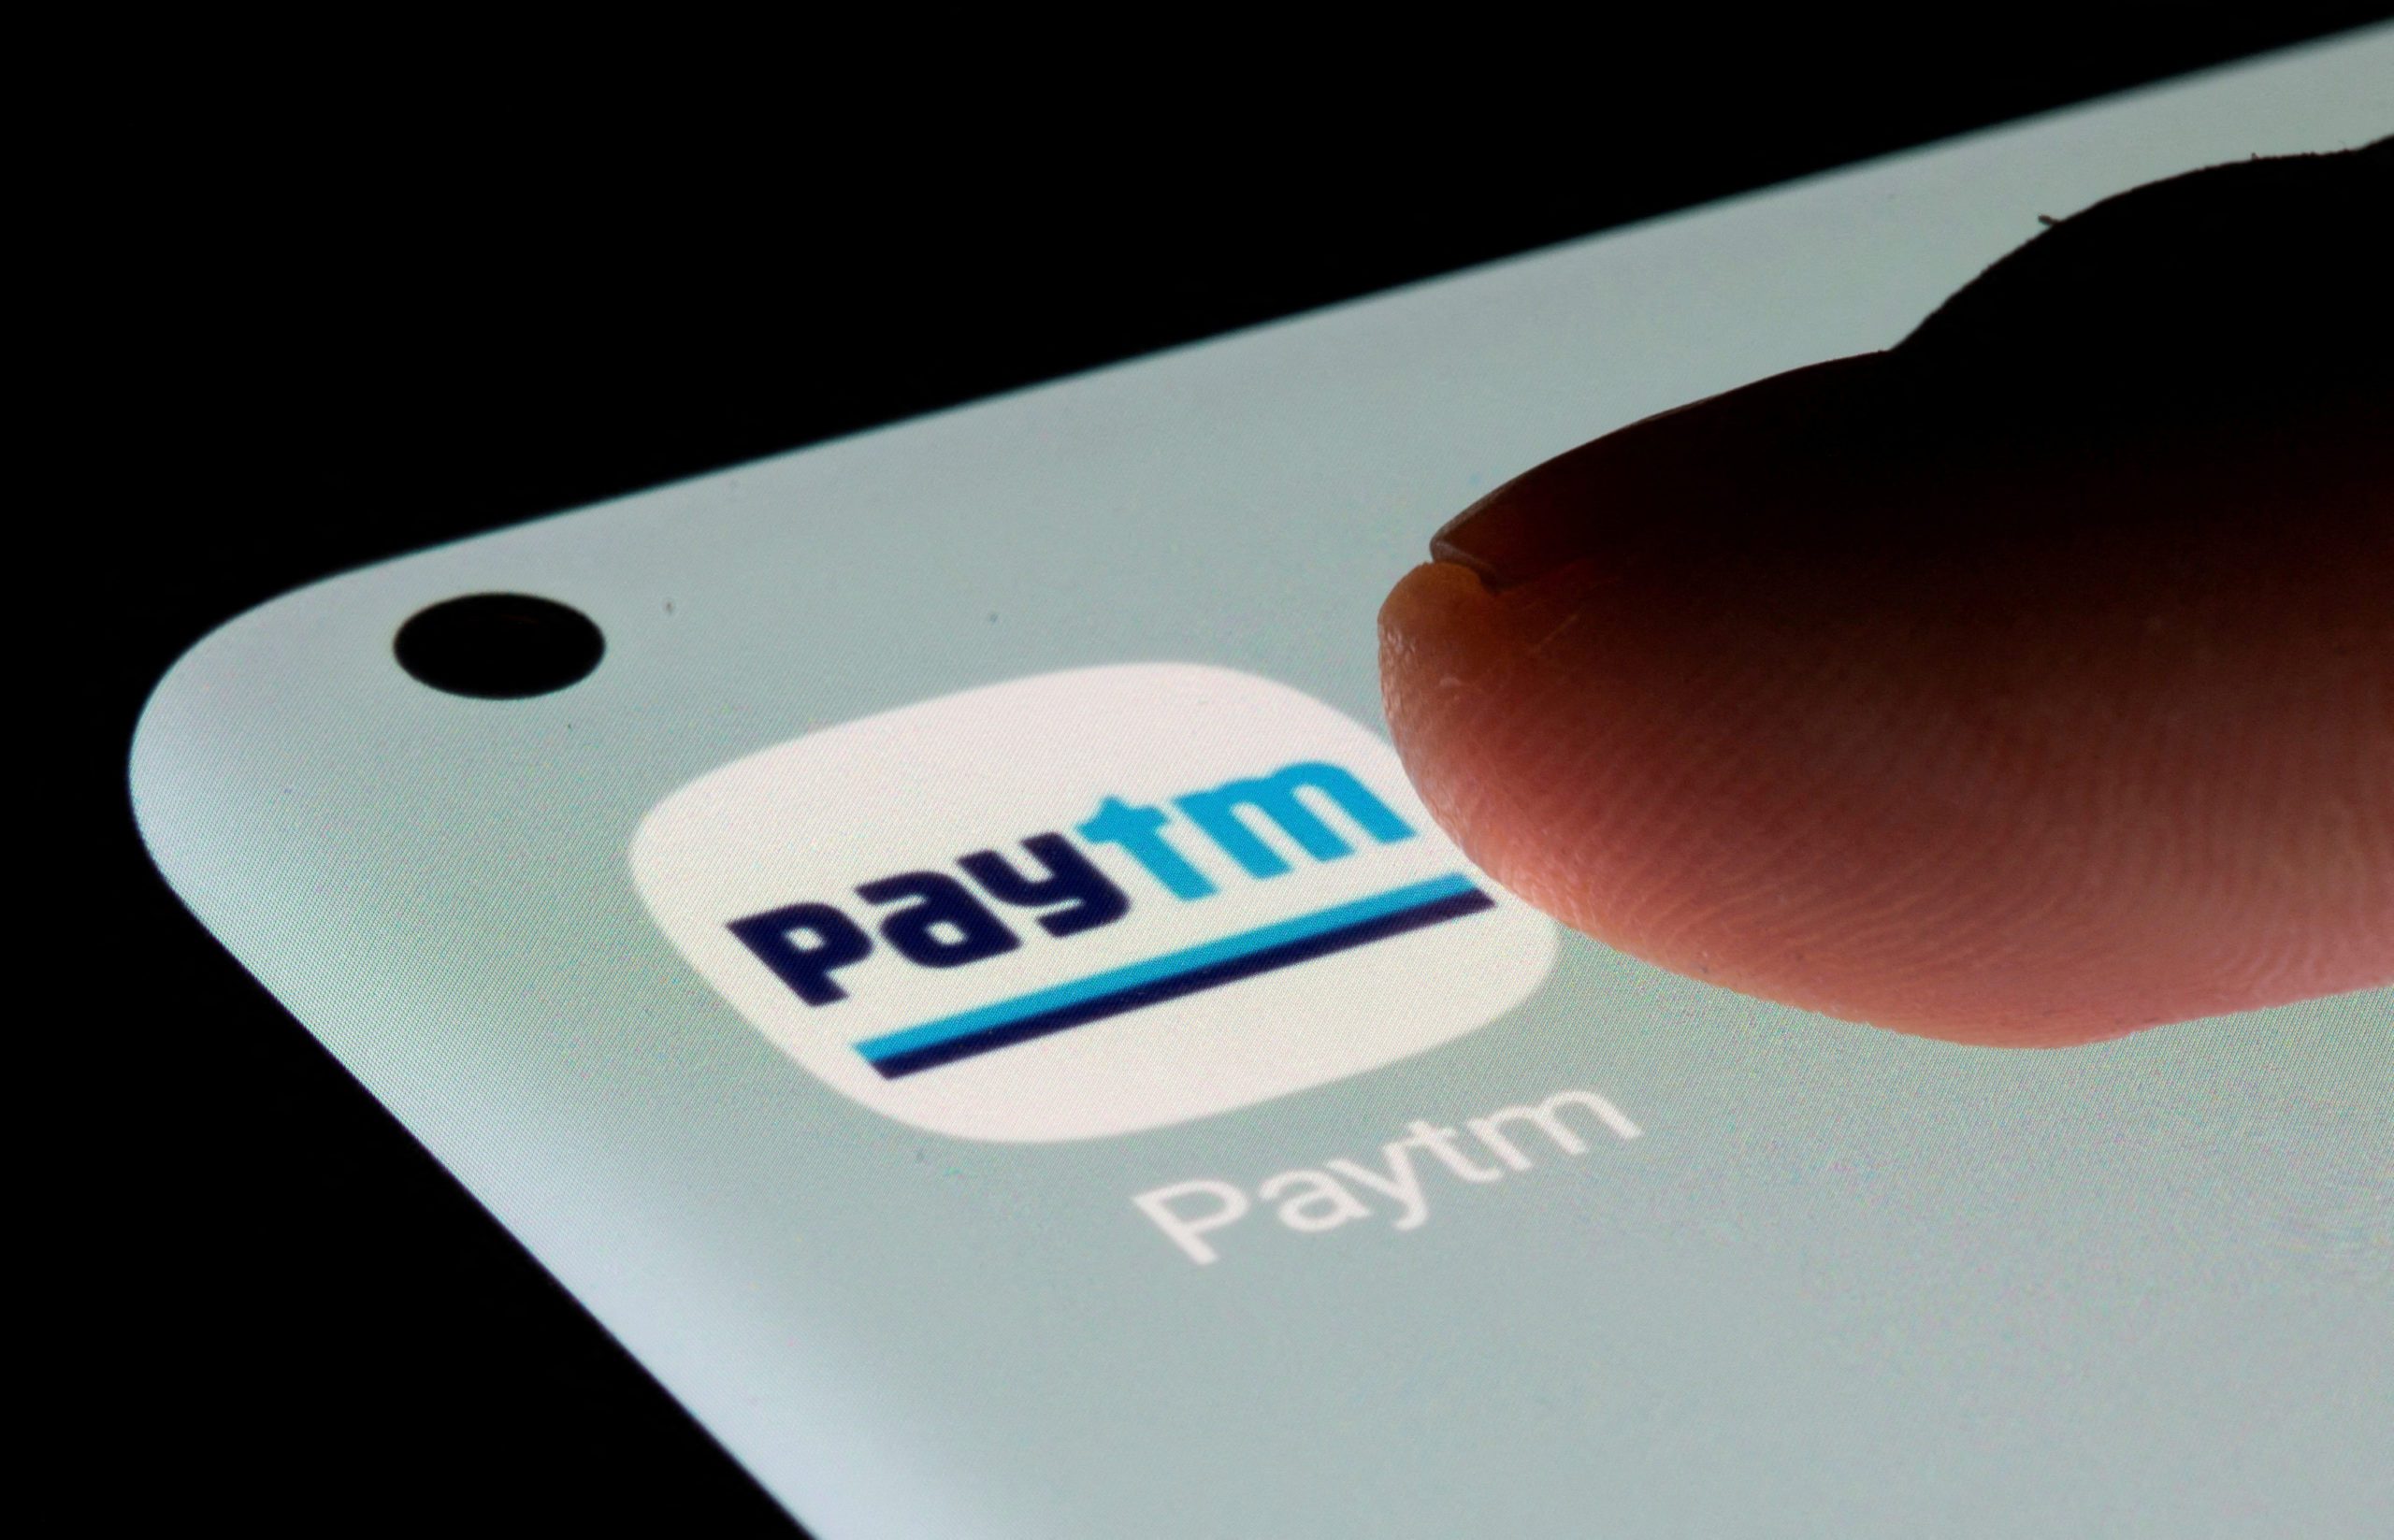 India's payments authority may grant third-party app licence to Paytm this week